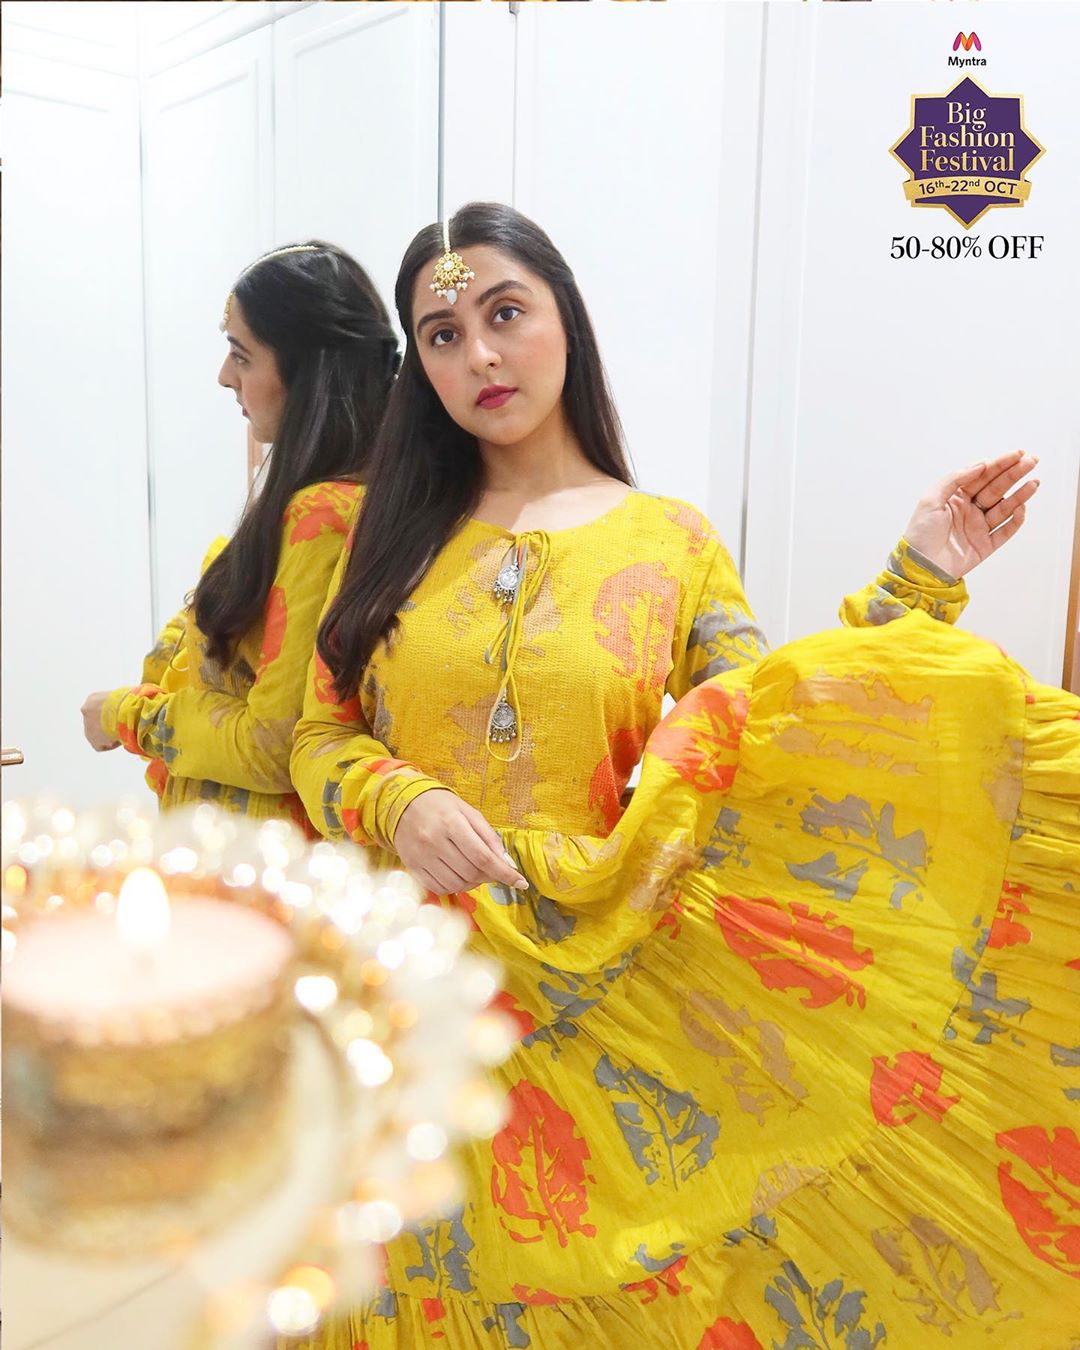 MYNTRA - India's Biggest Fashion Festival has arrived! 16th - 22nd Oct. @farheen_panjwani is ready for the Myntra Big Fashion Festival.
100% Fashion. Up To 80% Off.
Stay tuned.
https://bit.ly/3nkKK0t...